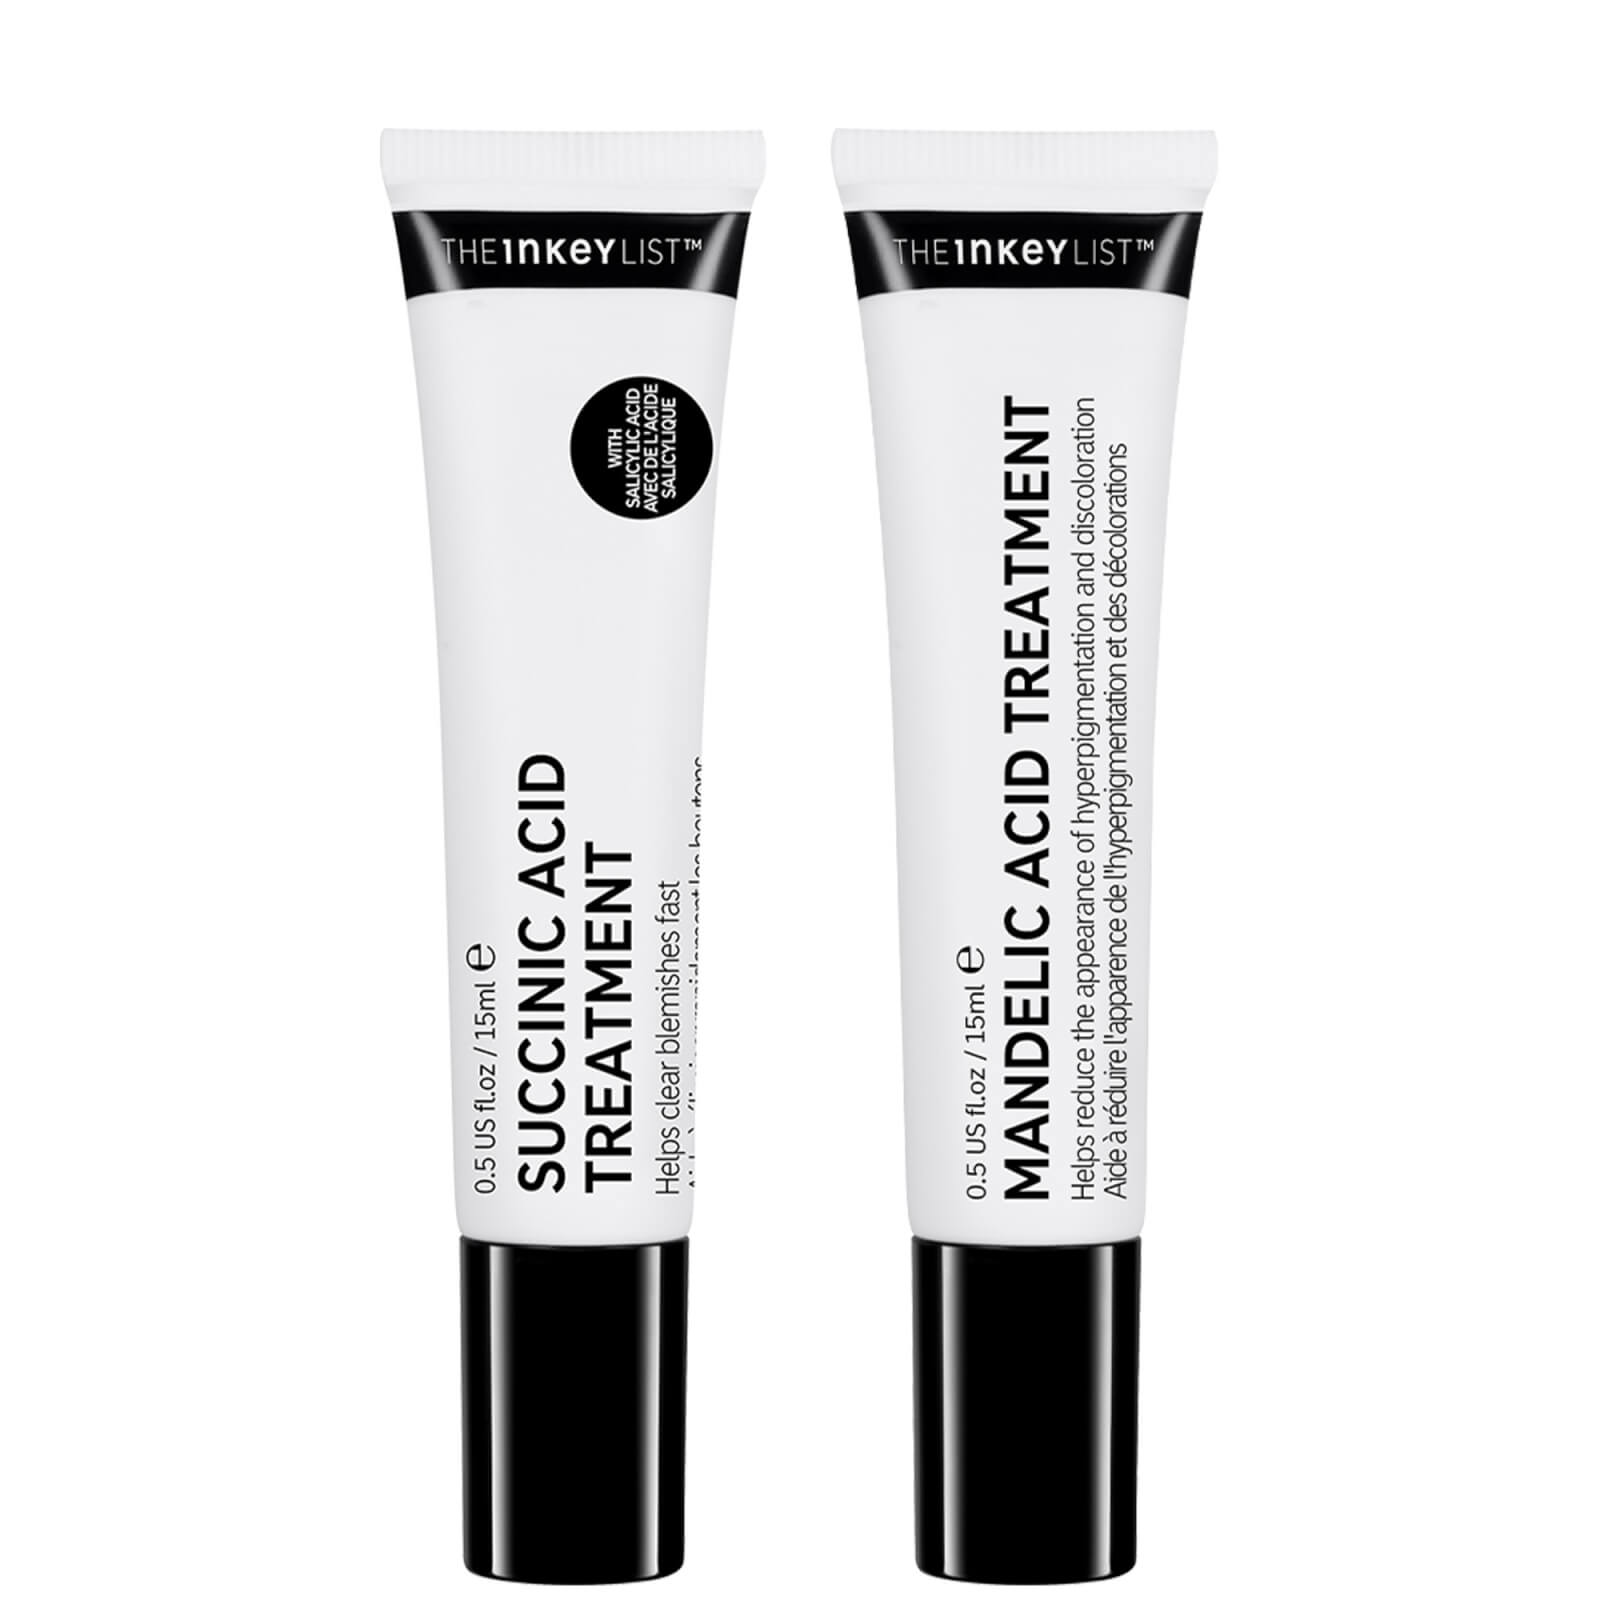 The Inkey List Targeted Blemish Duo